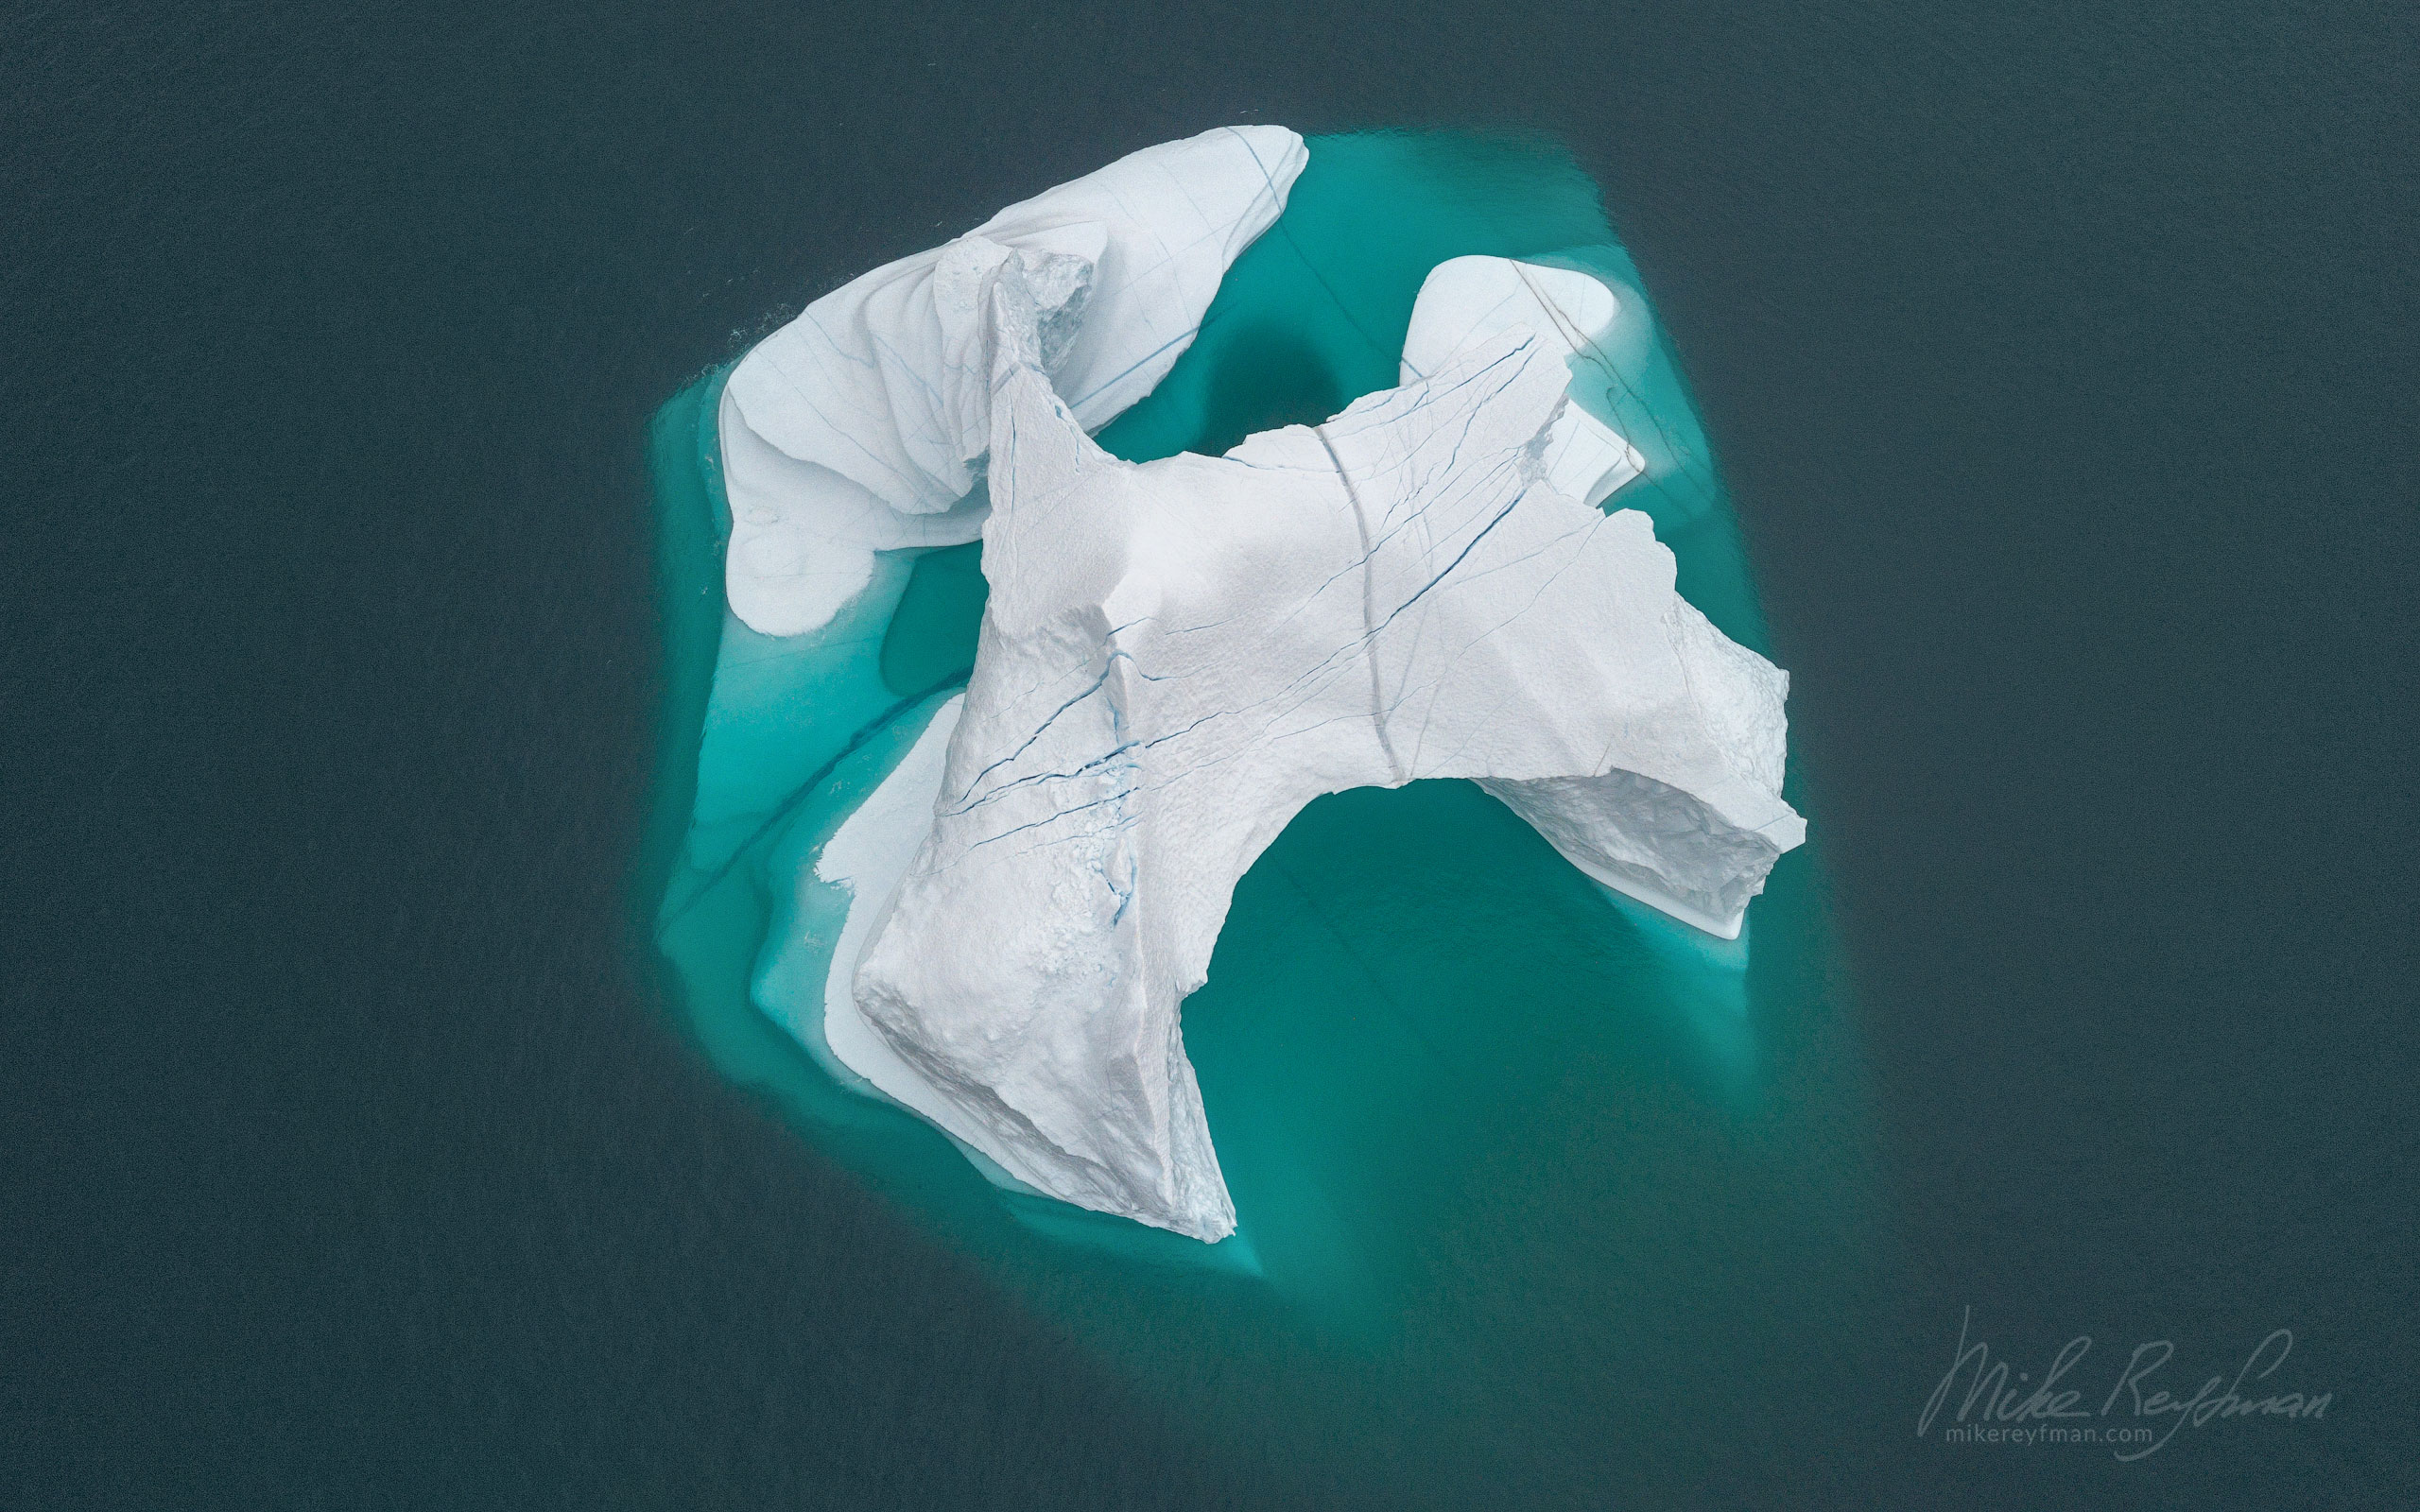 Iceberg in Scoresby Sund. Greenland. Aerial. 066-GR-SC_DJI_0491 - The Scoresby Sund fjord system and the settlement of Ittoqqortoormiit. East Greenland. - Mike Reyfman Photography